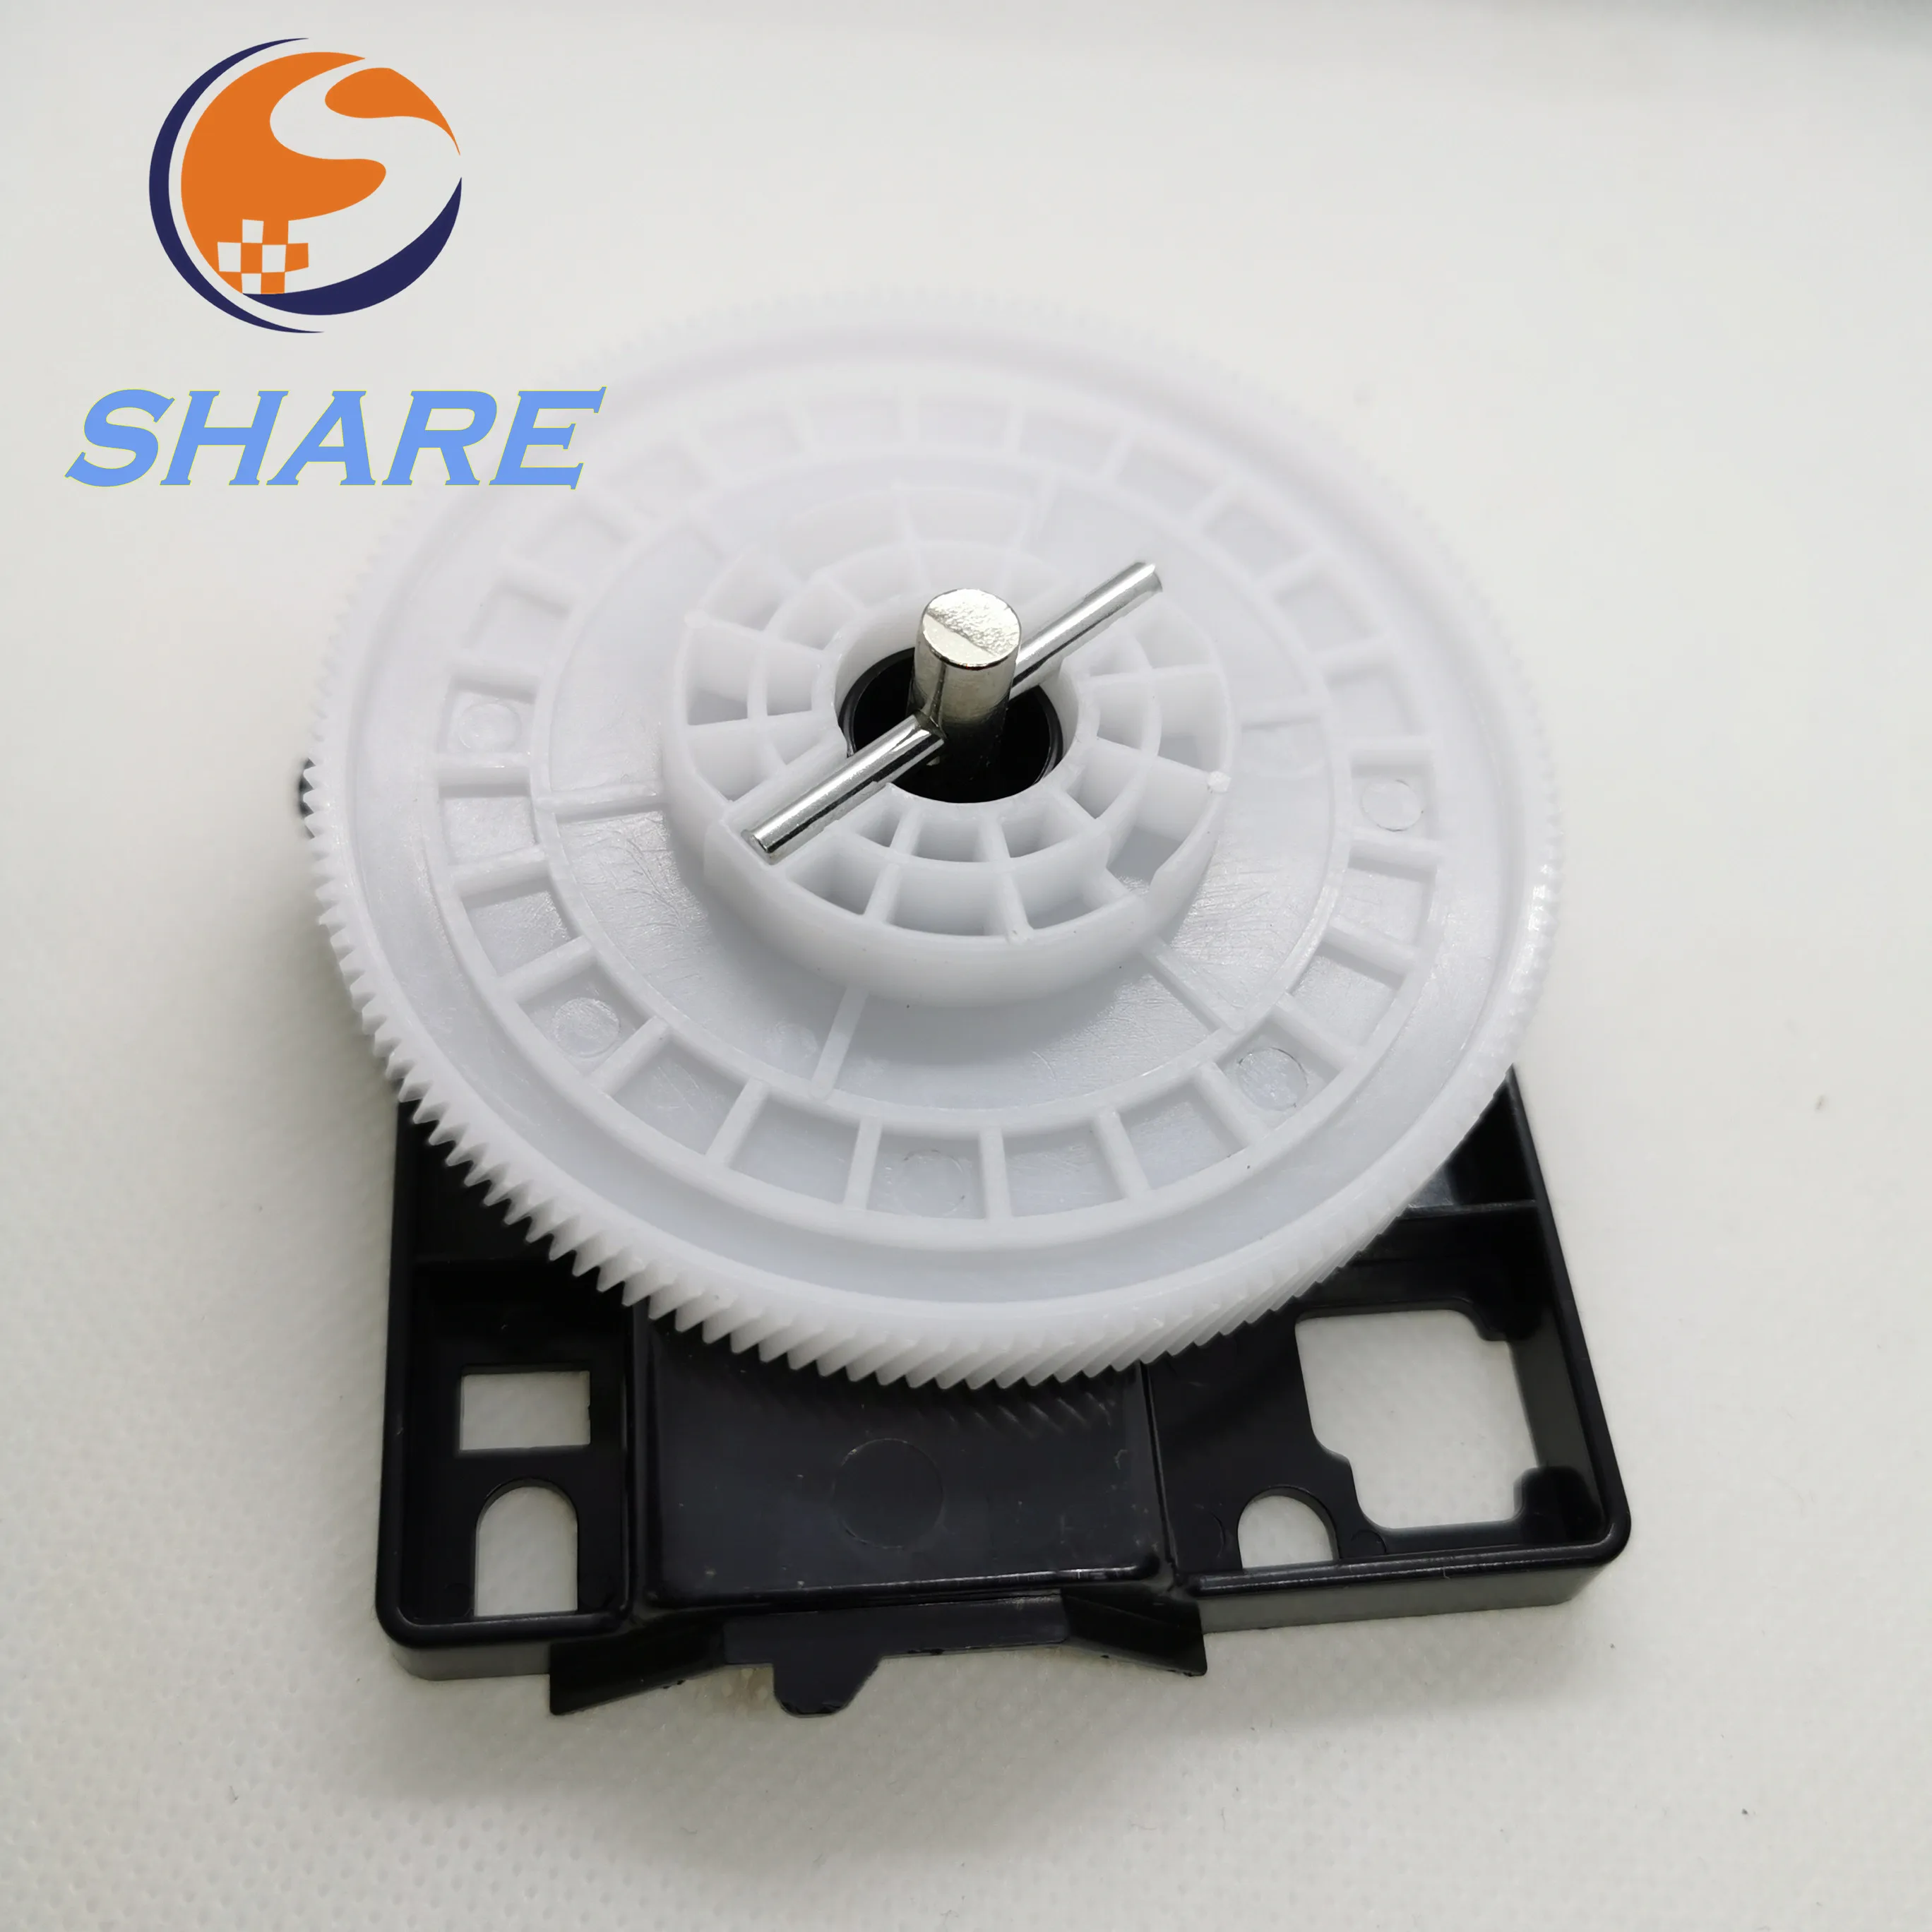 5PS RC3-2497 RC3-2497-000 Toner Drive Assy cover gear support frame Cartridge Drive Gear assy for HP Pro 400 M401 M425 M475 M451